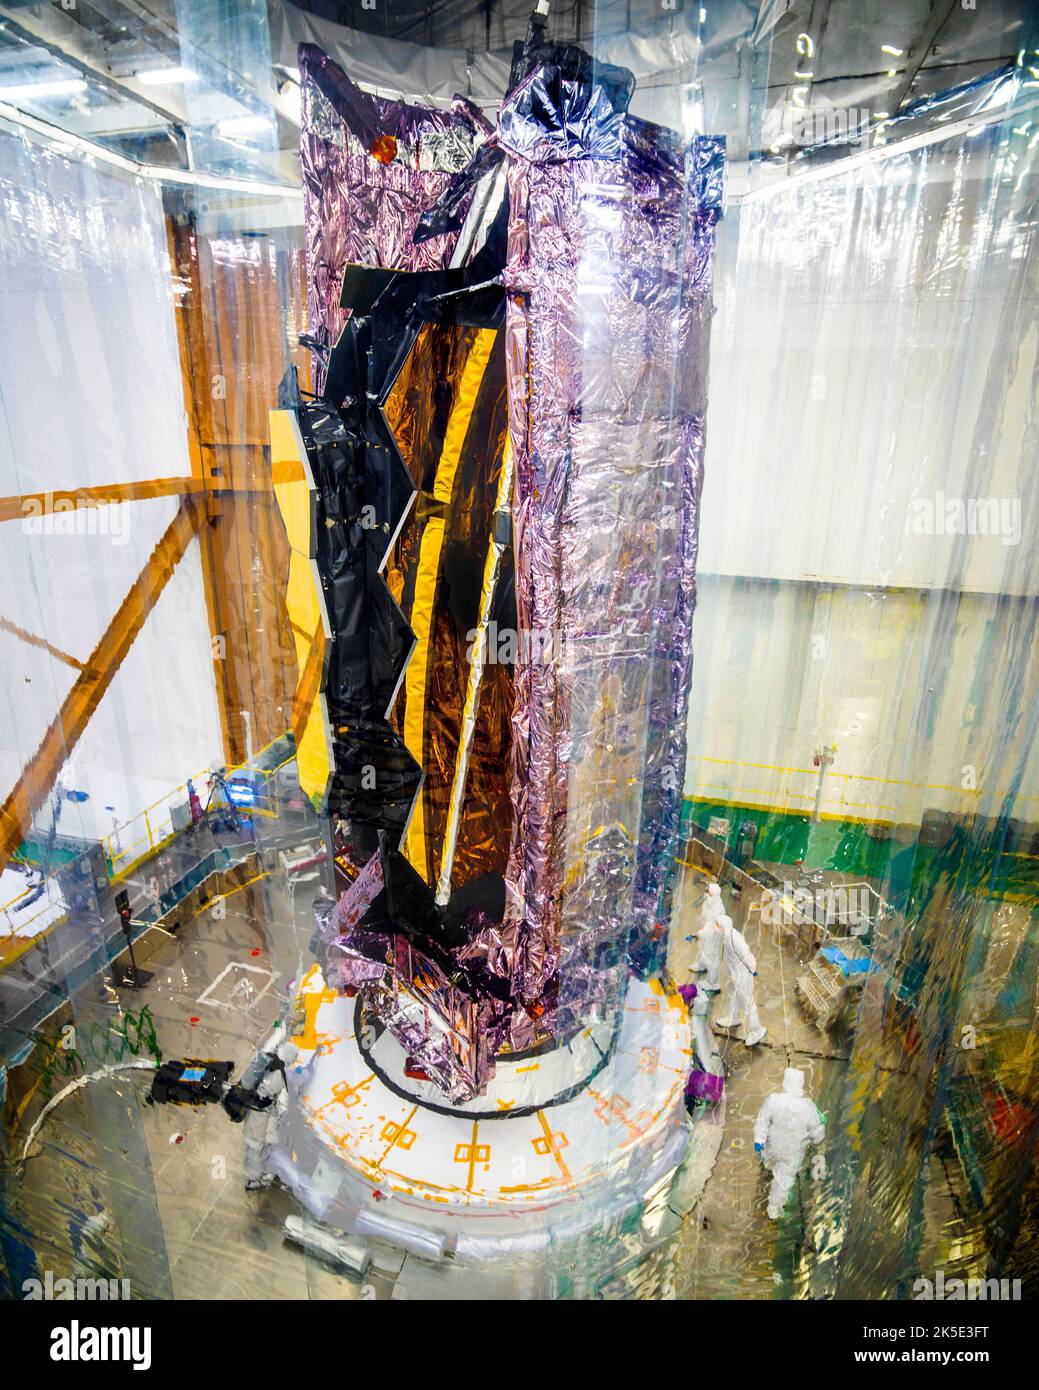 James Webb Space Telescope (JWST) on Launcher. This image shows the James Webb Space Telescope atop its launch vehicle, but before it was encapsulated in the rocket fairing. You can see a protective clean tent around the telescope. The JWST was launched on 25 December 2021  An optimised version of a NASA image by experienced lead photographer Chris Gunn. Credit: NASA/Chris Gunn. For editorial use only. Stock Photo